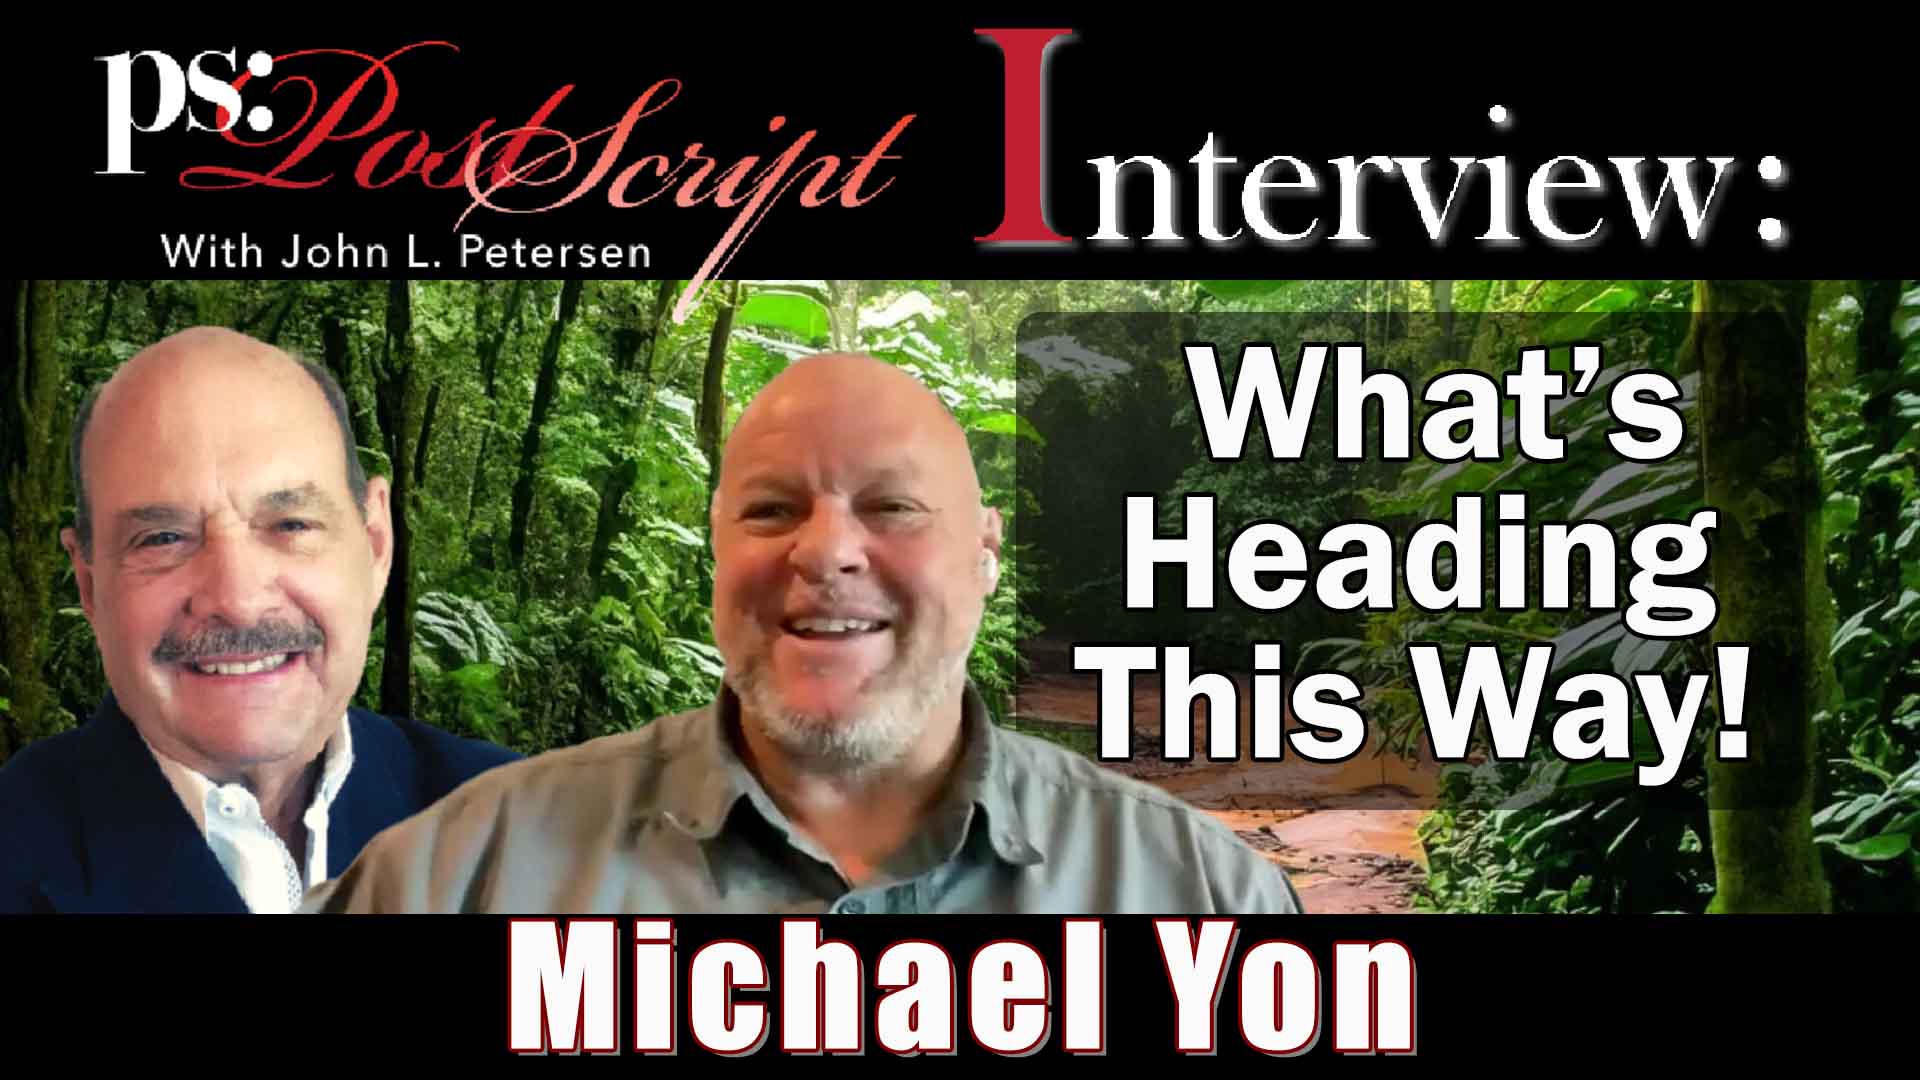 Interview with Michael Yon, What's Heading This Way